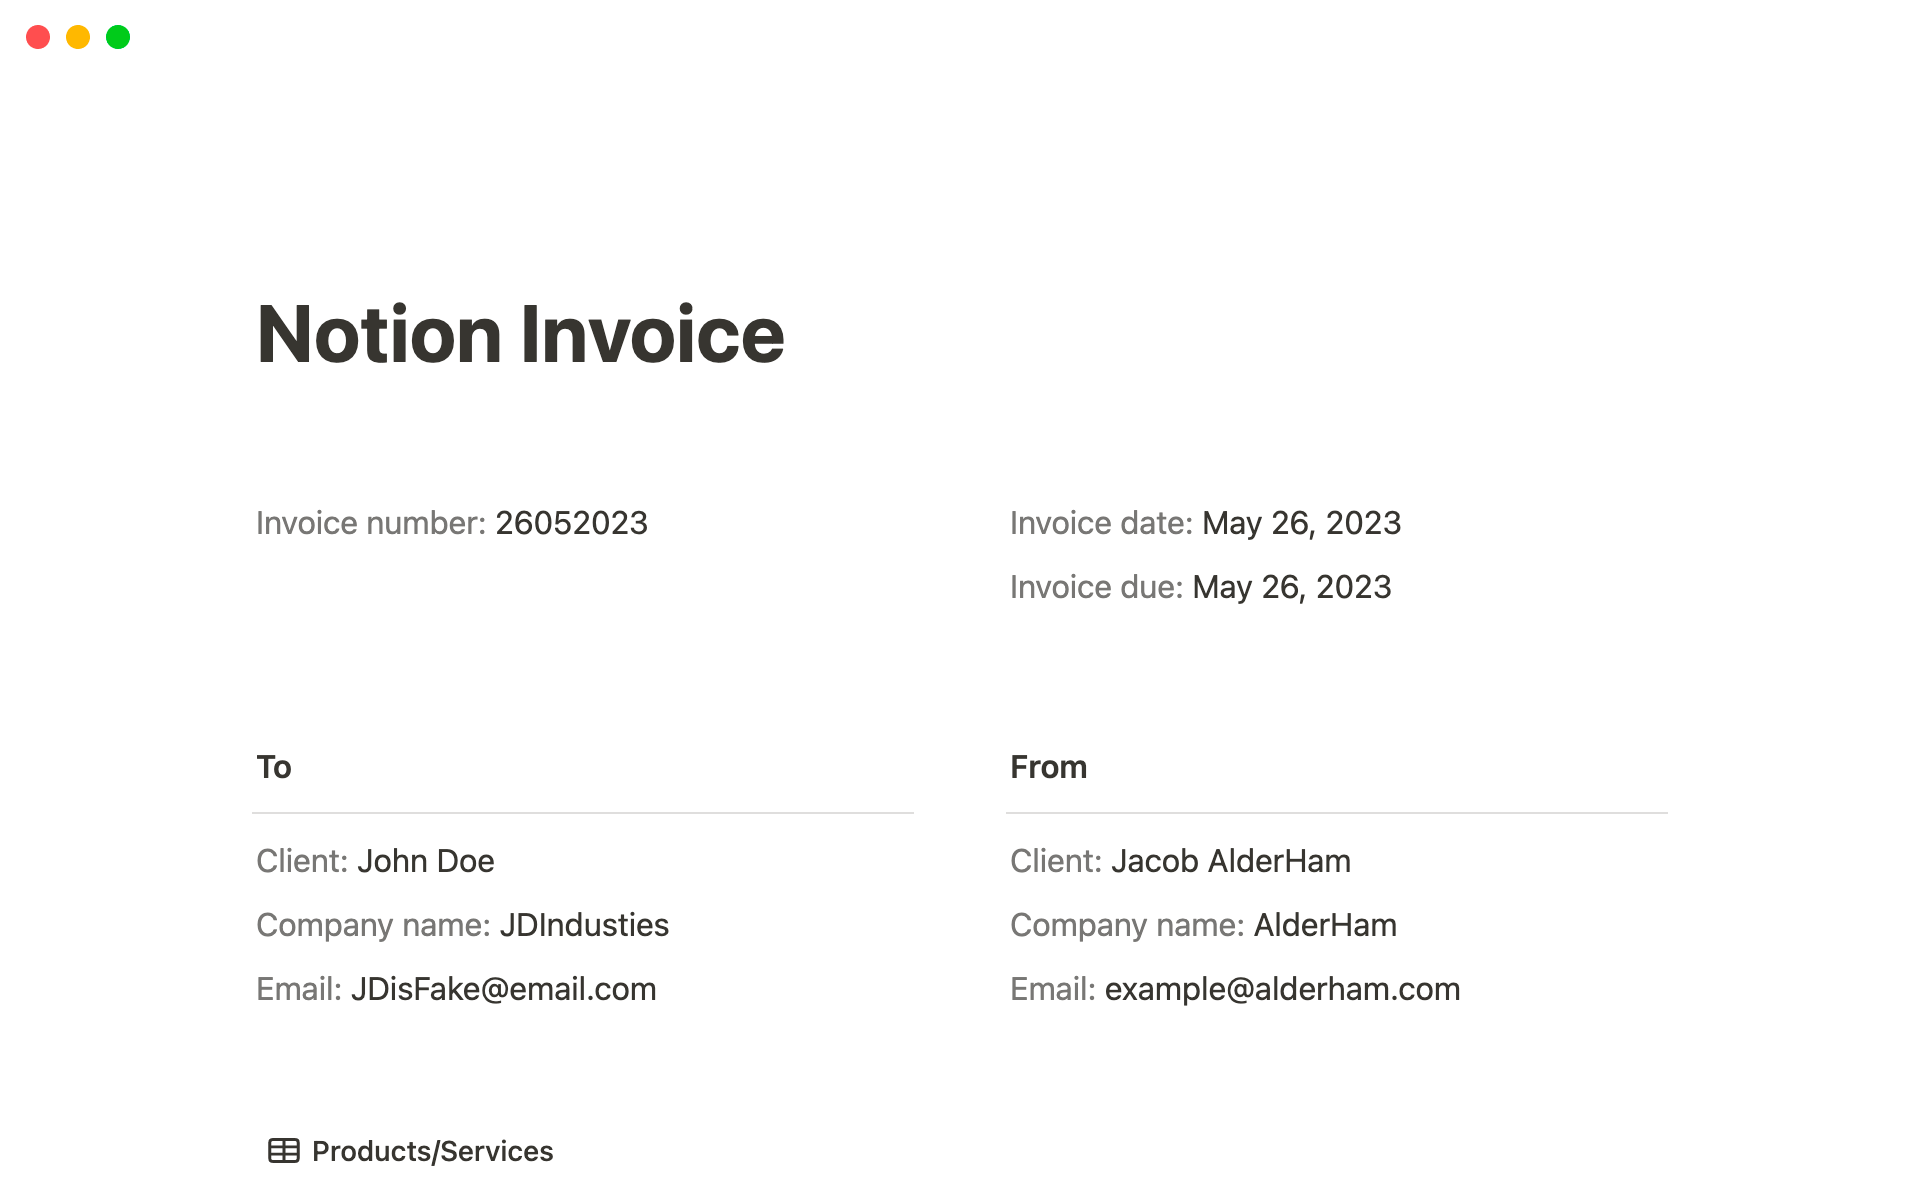 Save time when creating invoices!